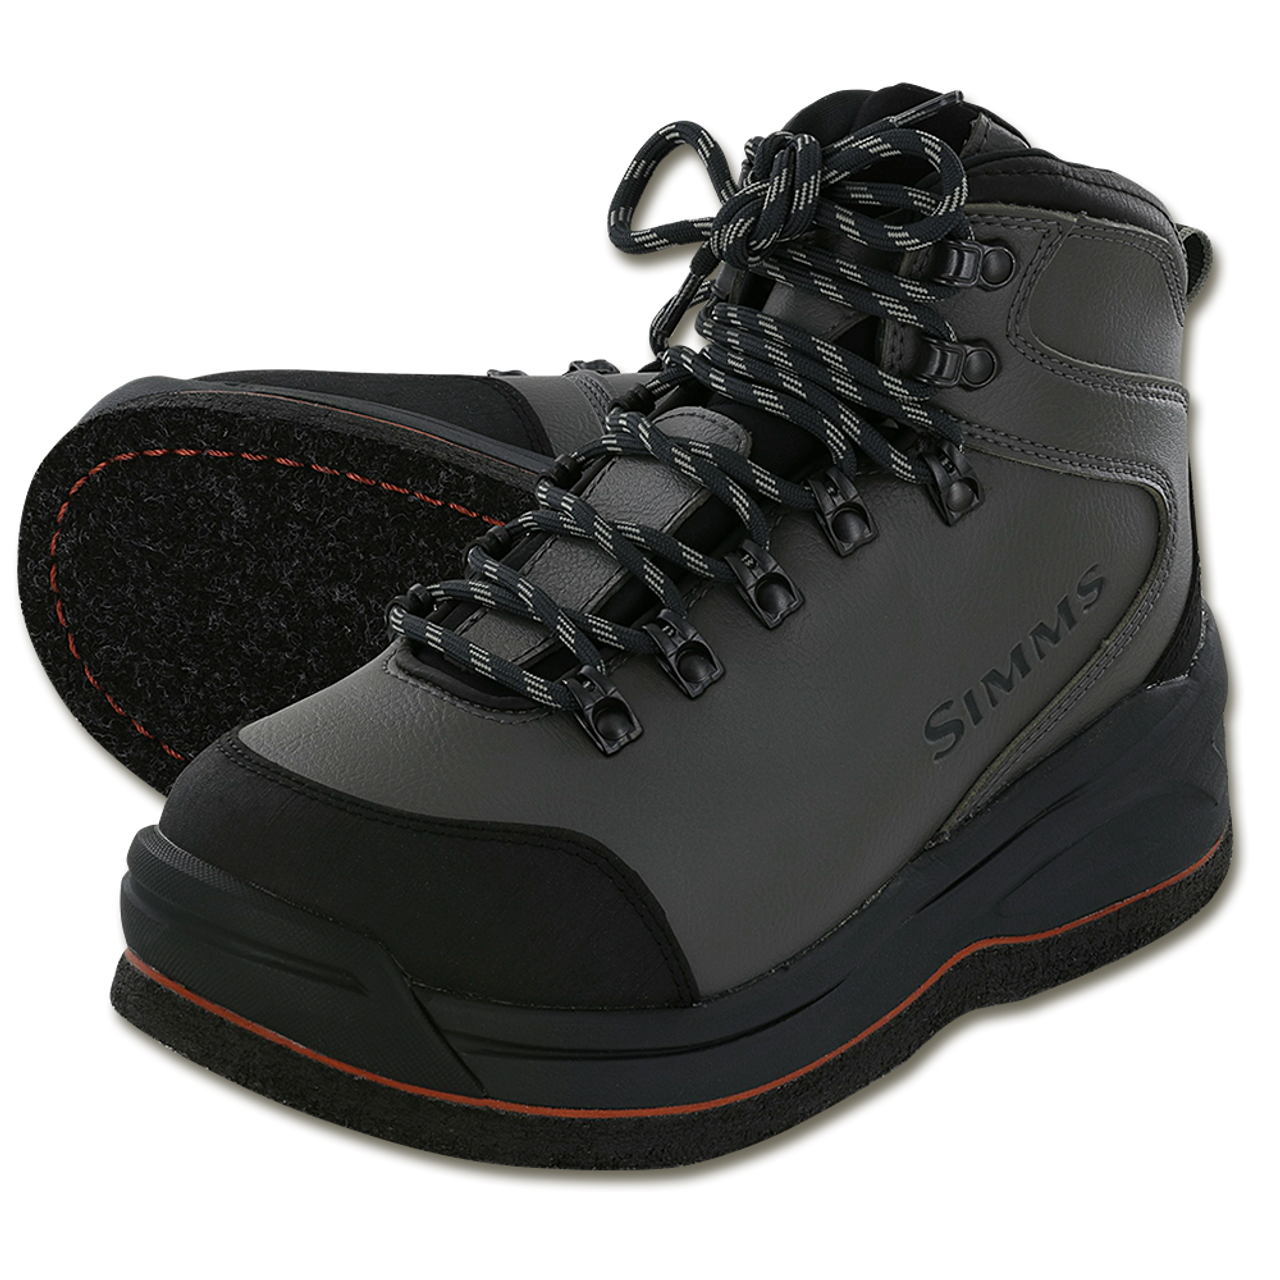 Simms Women's Freestone Wading Boot - Rubber Sole